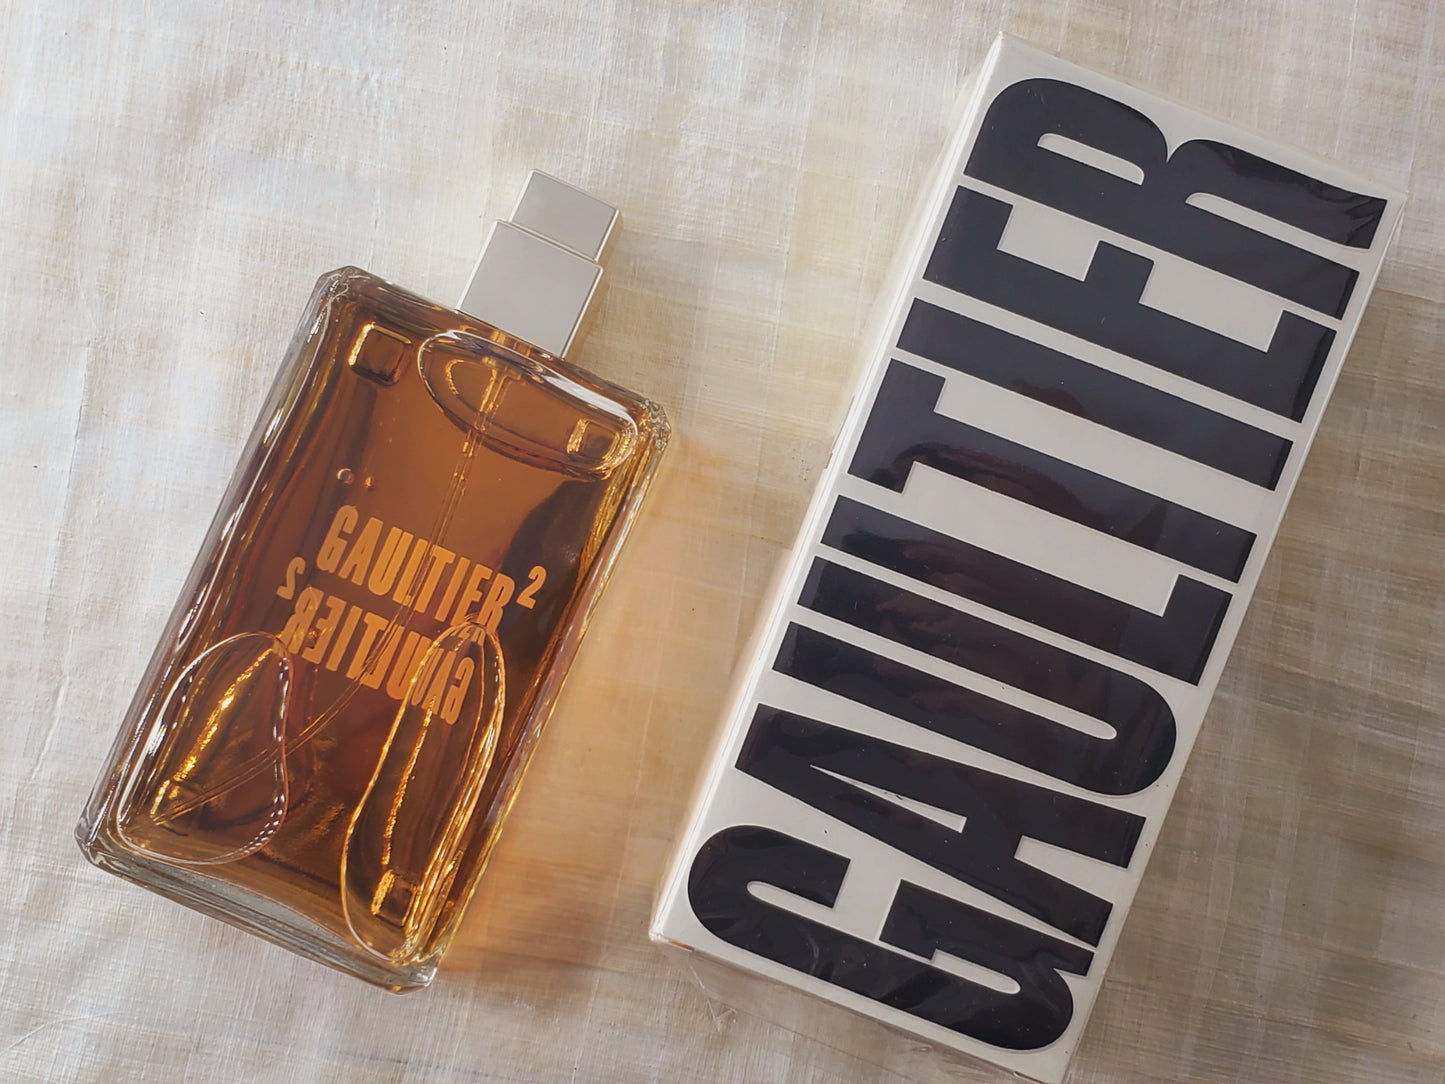 Gaultier 2 Jean Paul Gaultier for women and men EDP Spray 120 ml 4 oz, Vintage, Very Rare, Hard to find